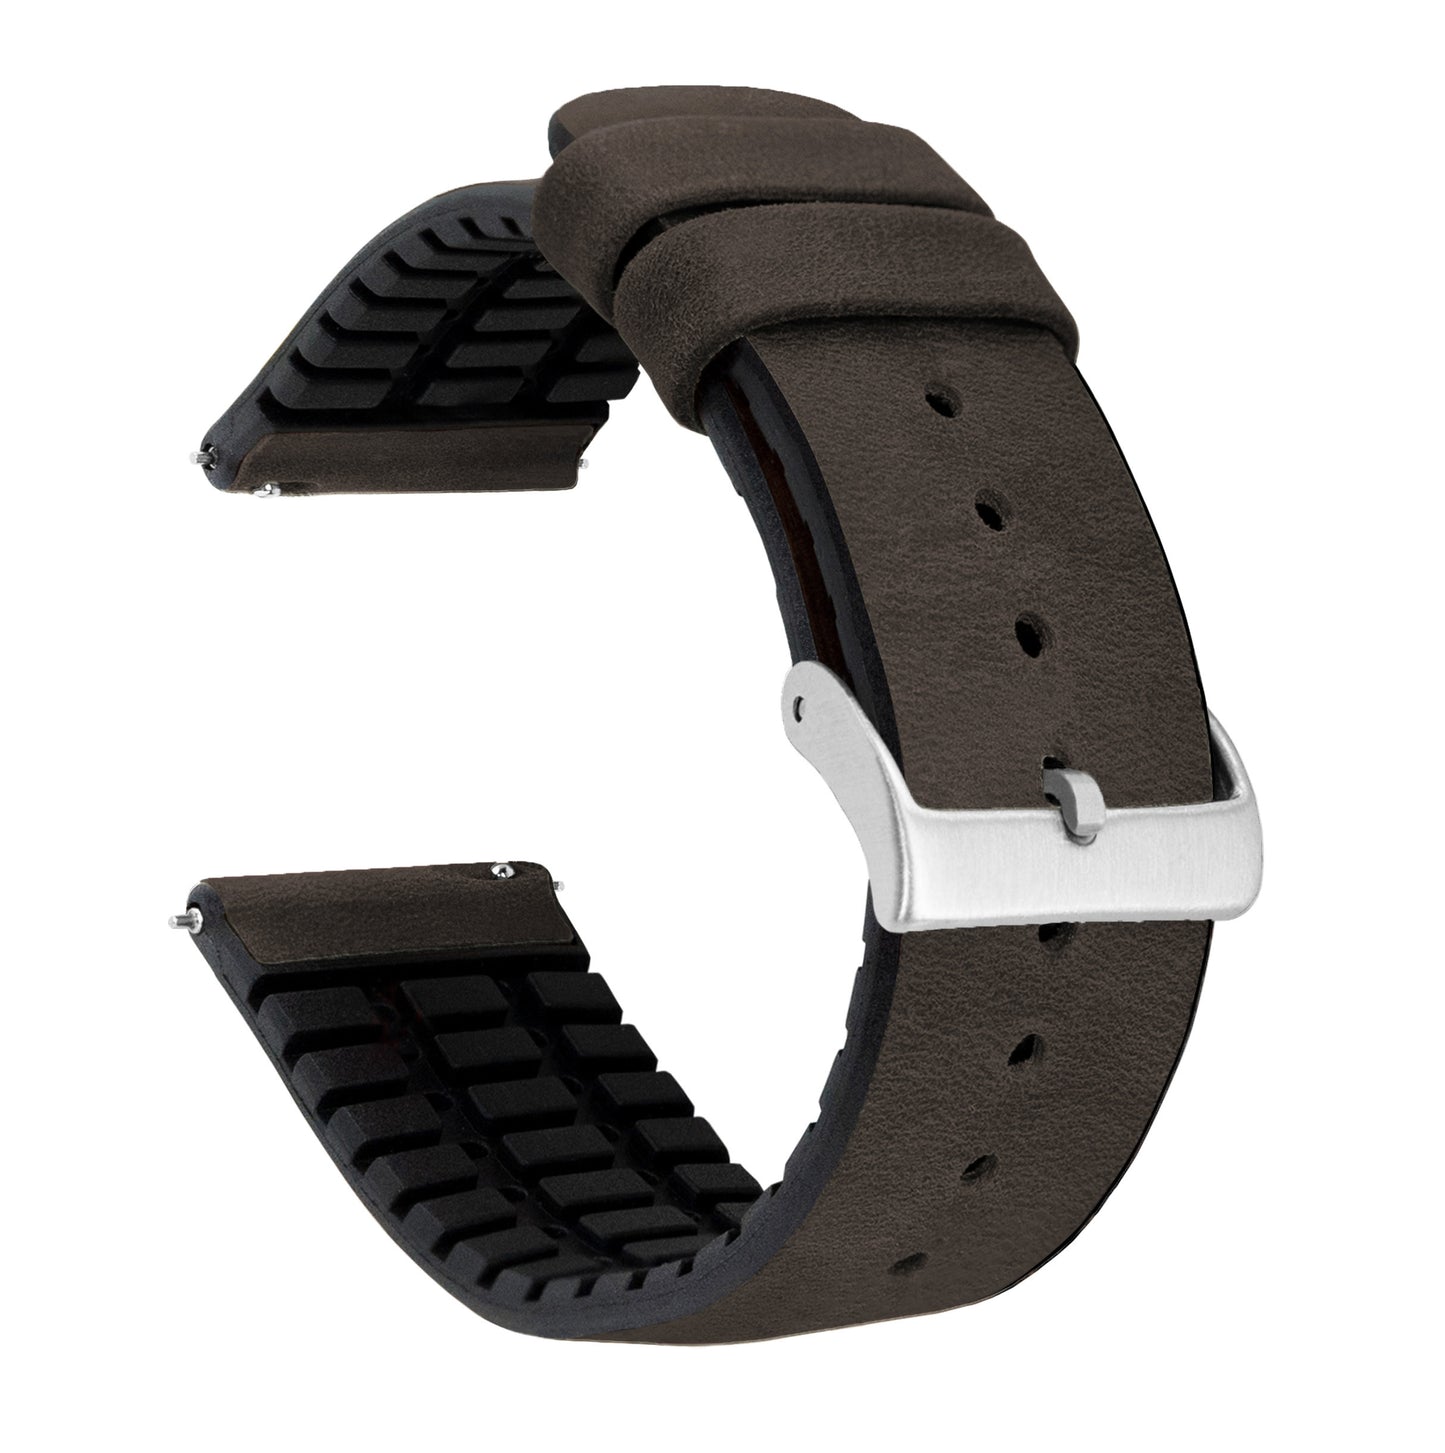 Smoke Leather and Rubber Hybrid - Barton Watch Bands